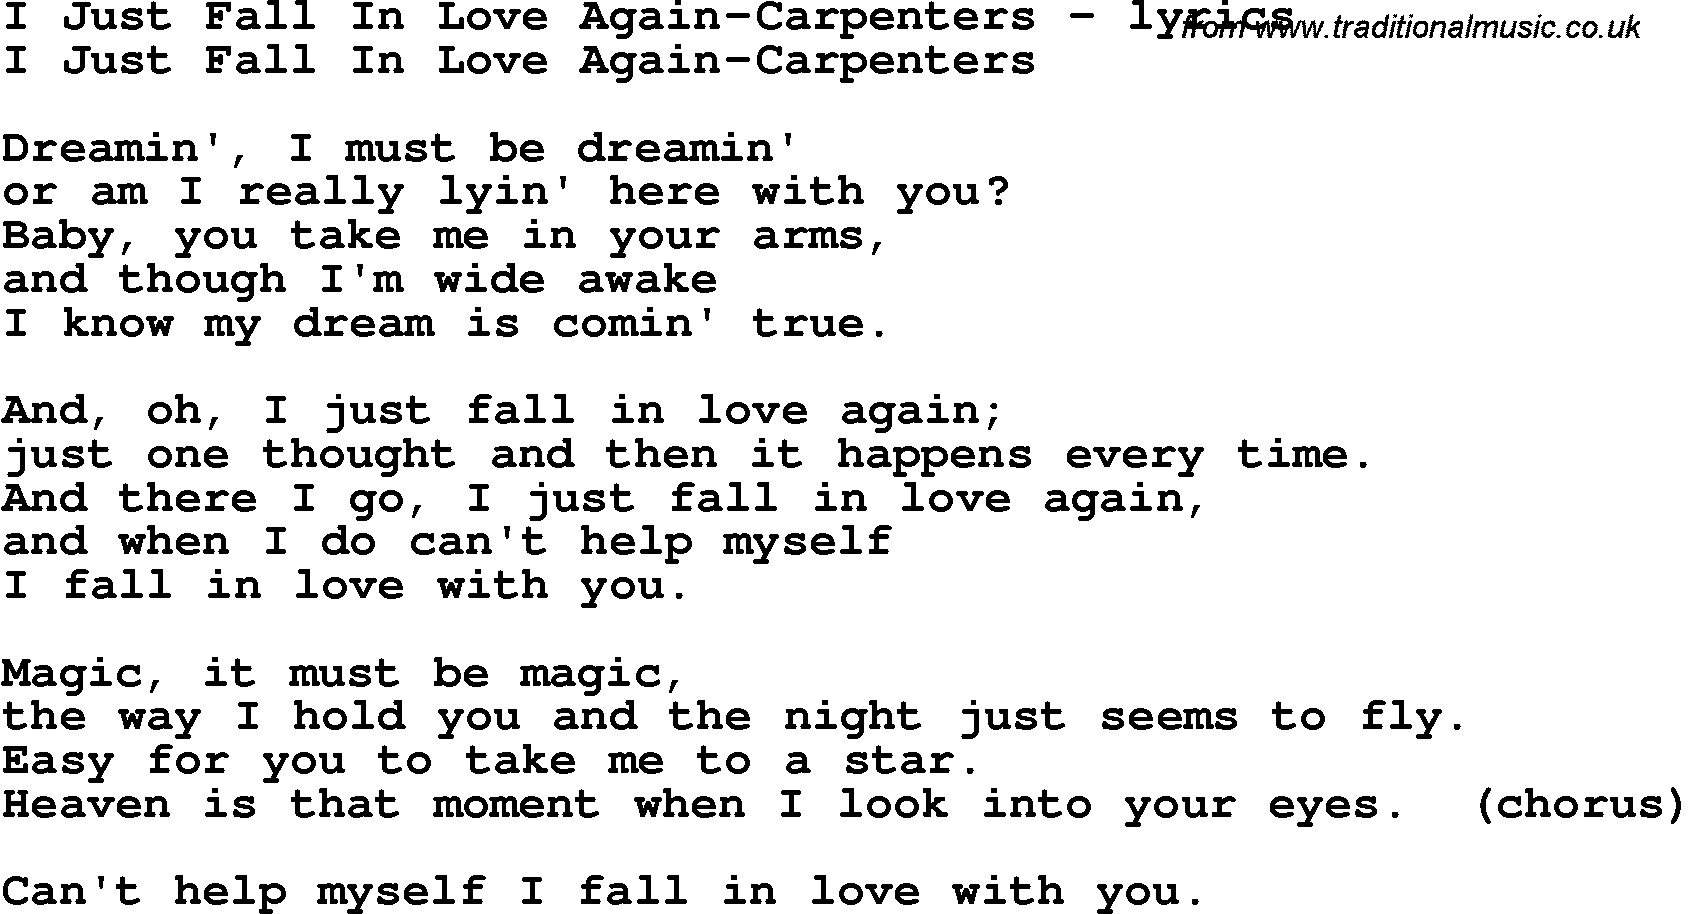 Love Song Lyrics for: I Just Fall In Love Again-Carpenters